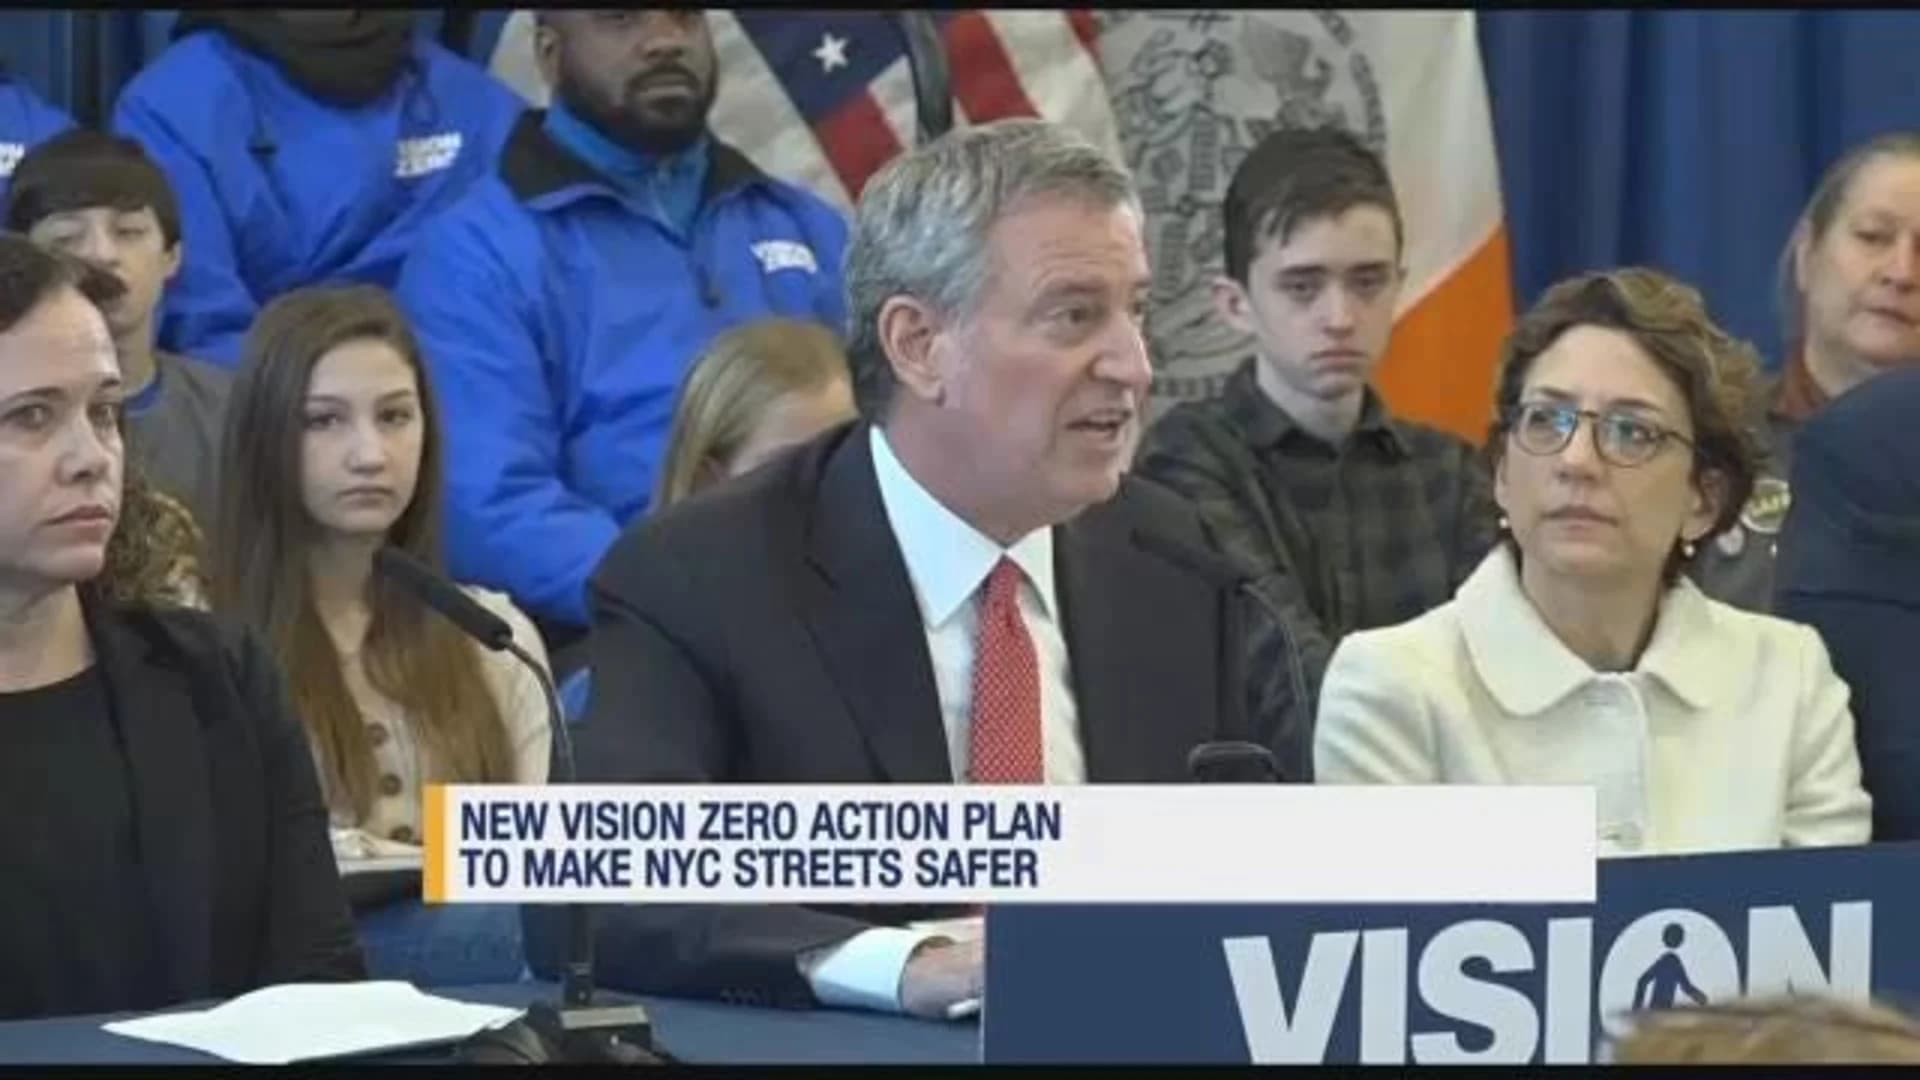 Mayor announces new actions for ‘Vision Zero’ plan